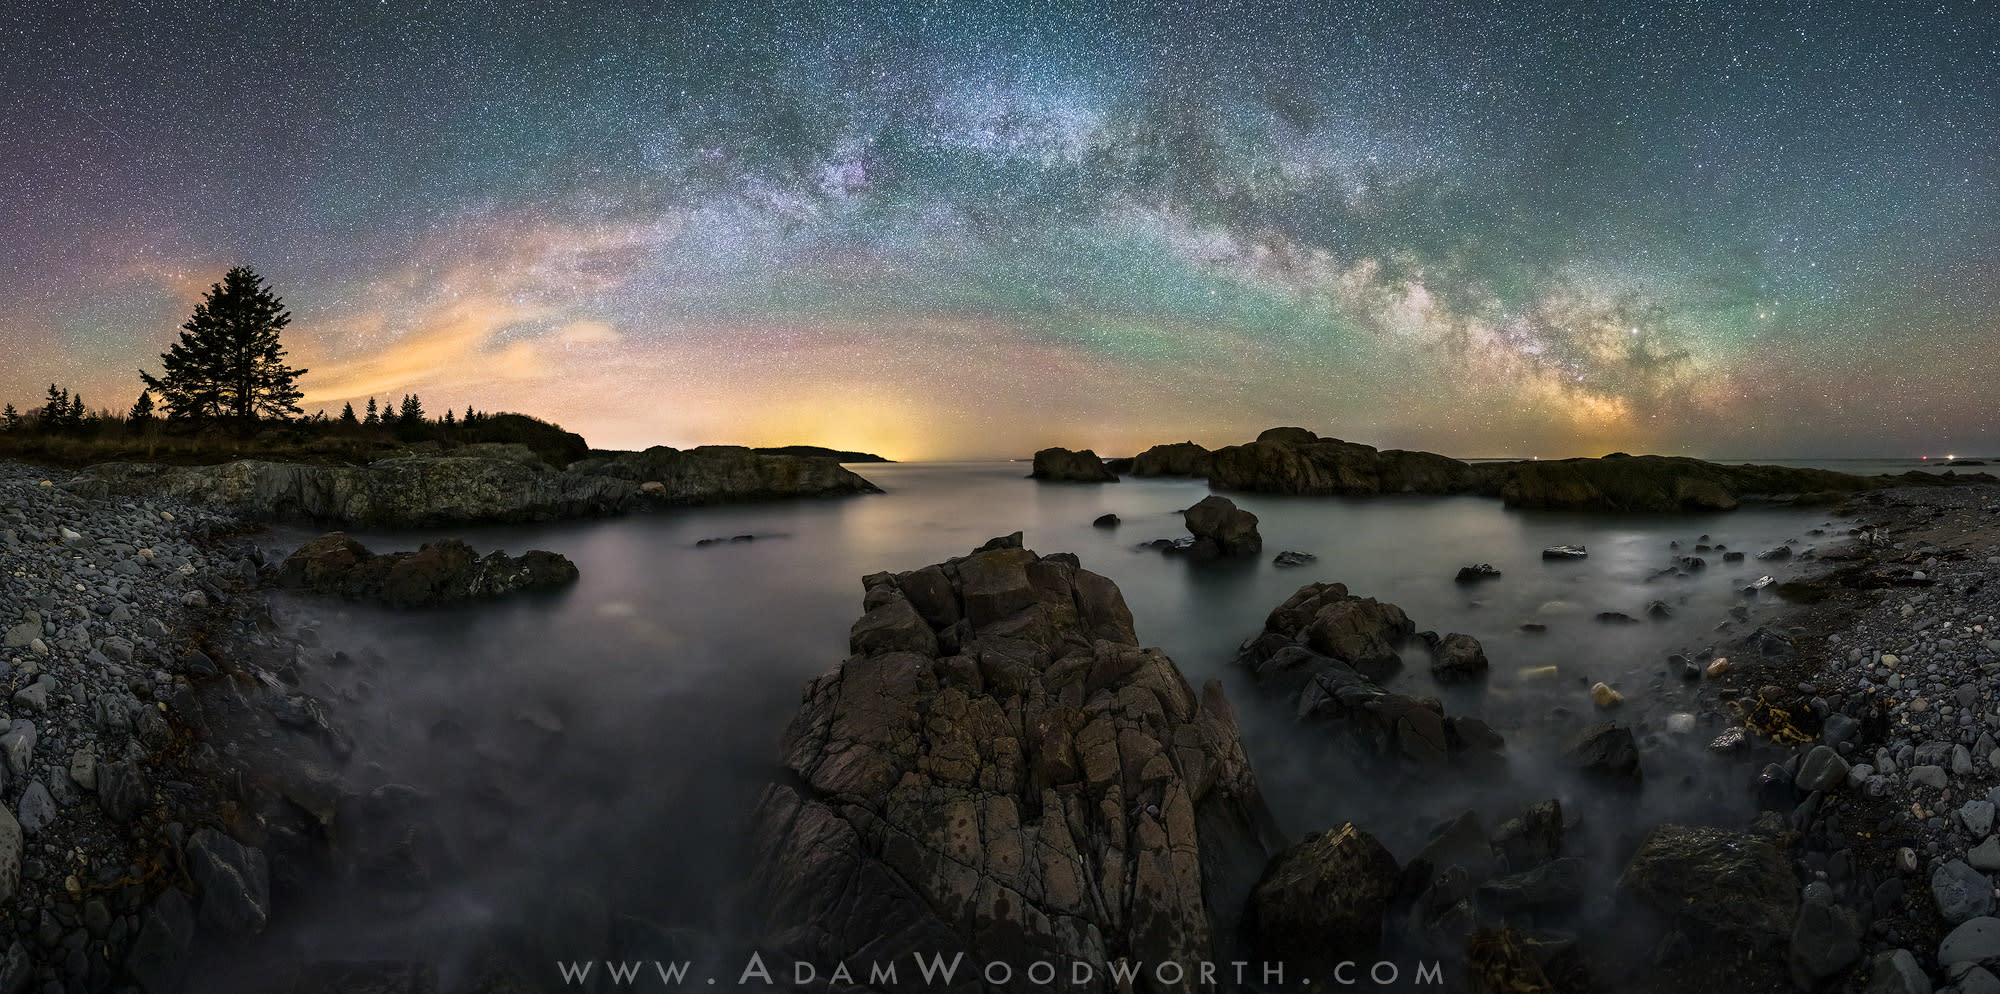  ahw1771 web moose cove milky way panorama ght110